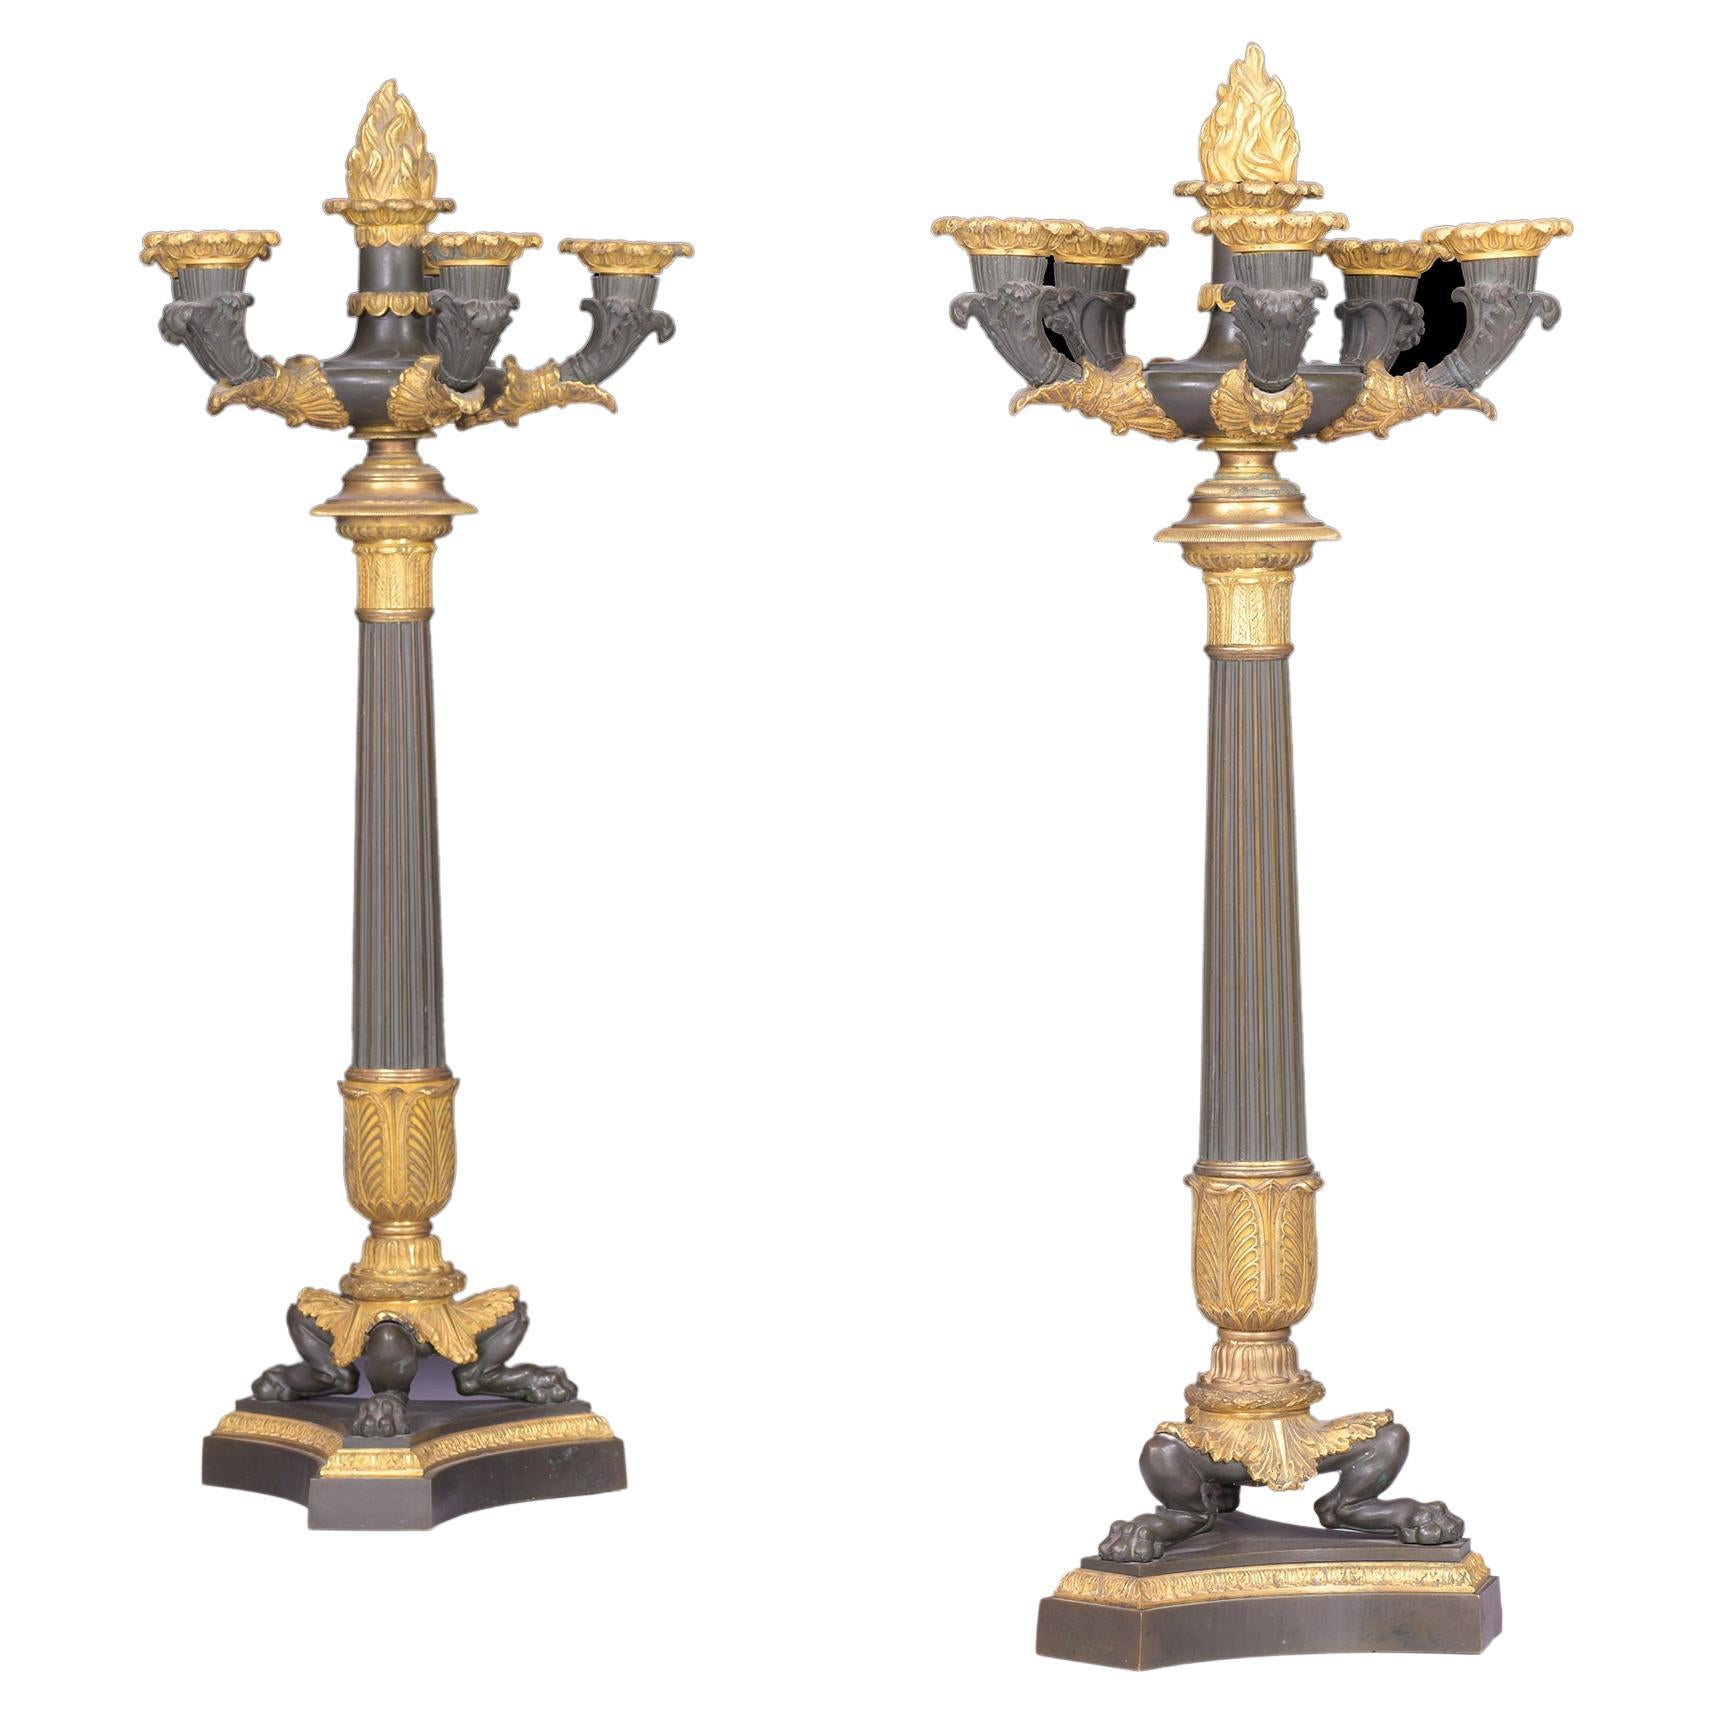 Pair of 19th Century French Bronze and Ormolu Candelabra